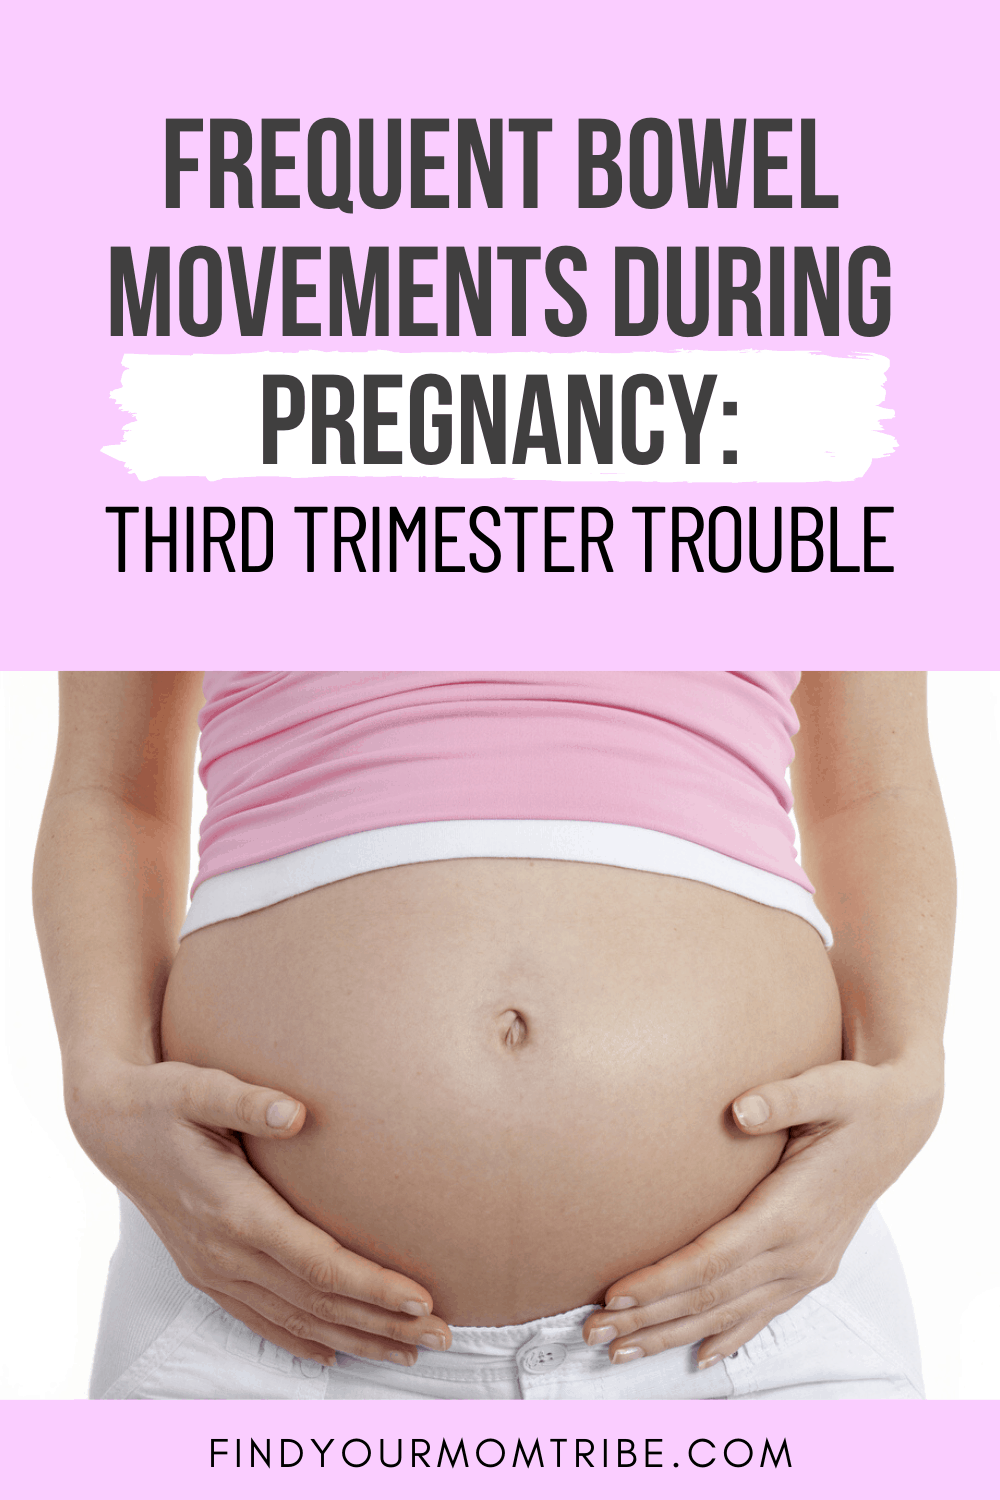 Pinterest frequent bowel movements during pregnancy third trimester